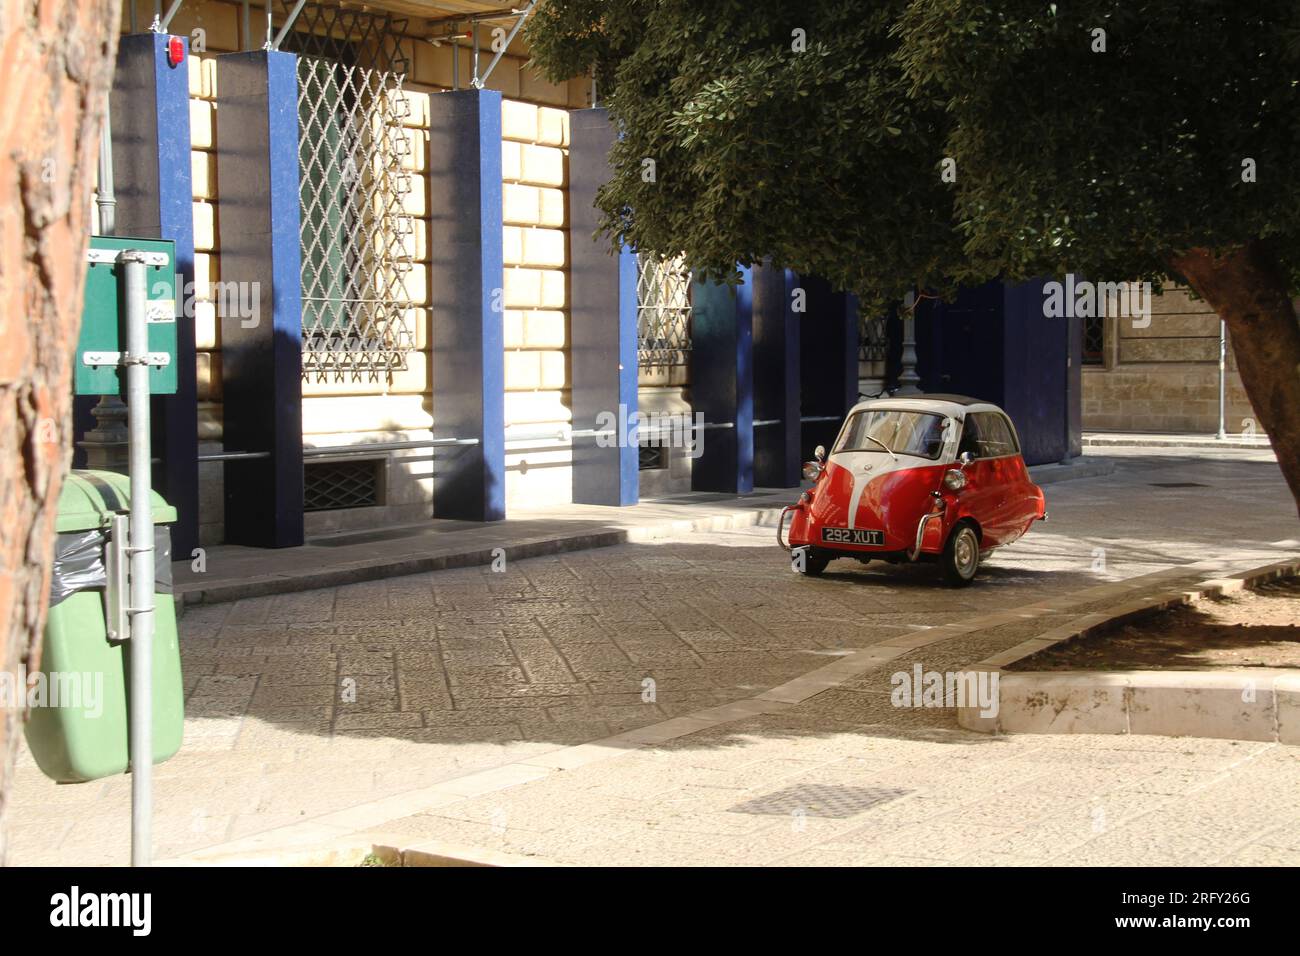 A classic BMW Isetta on a street in Italy Stock Photo